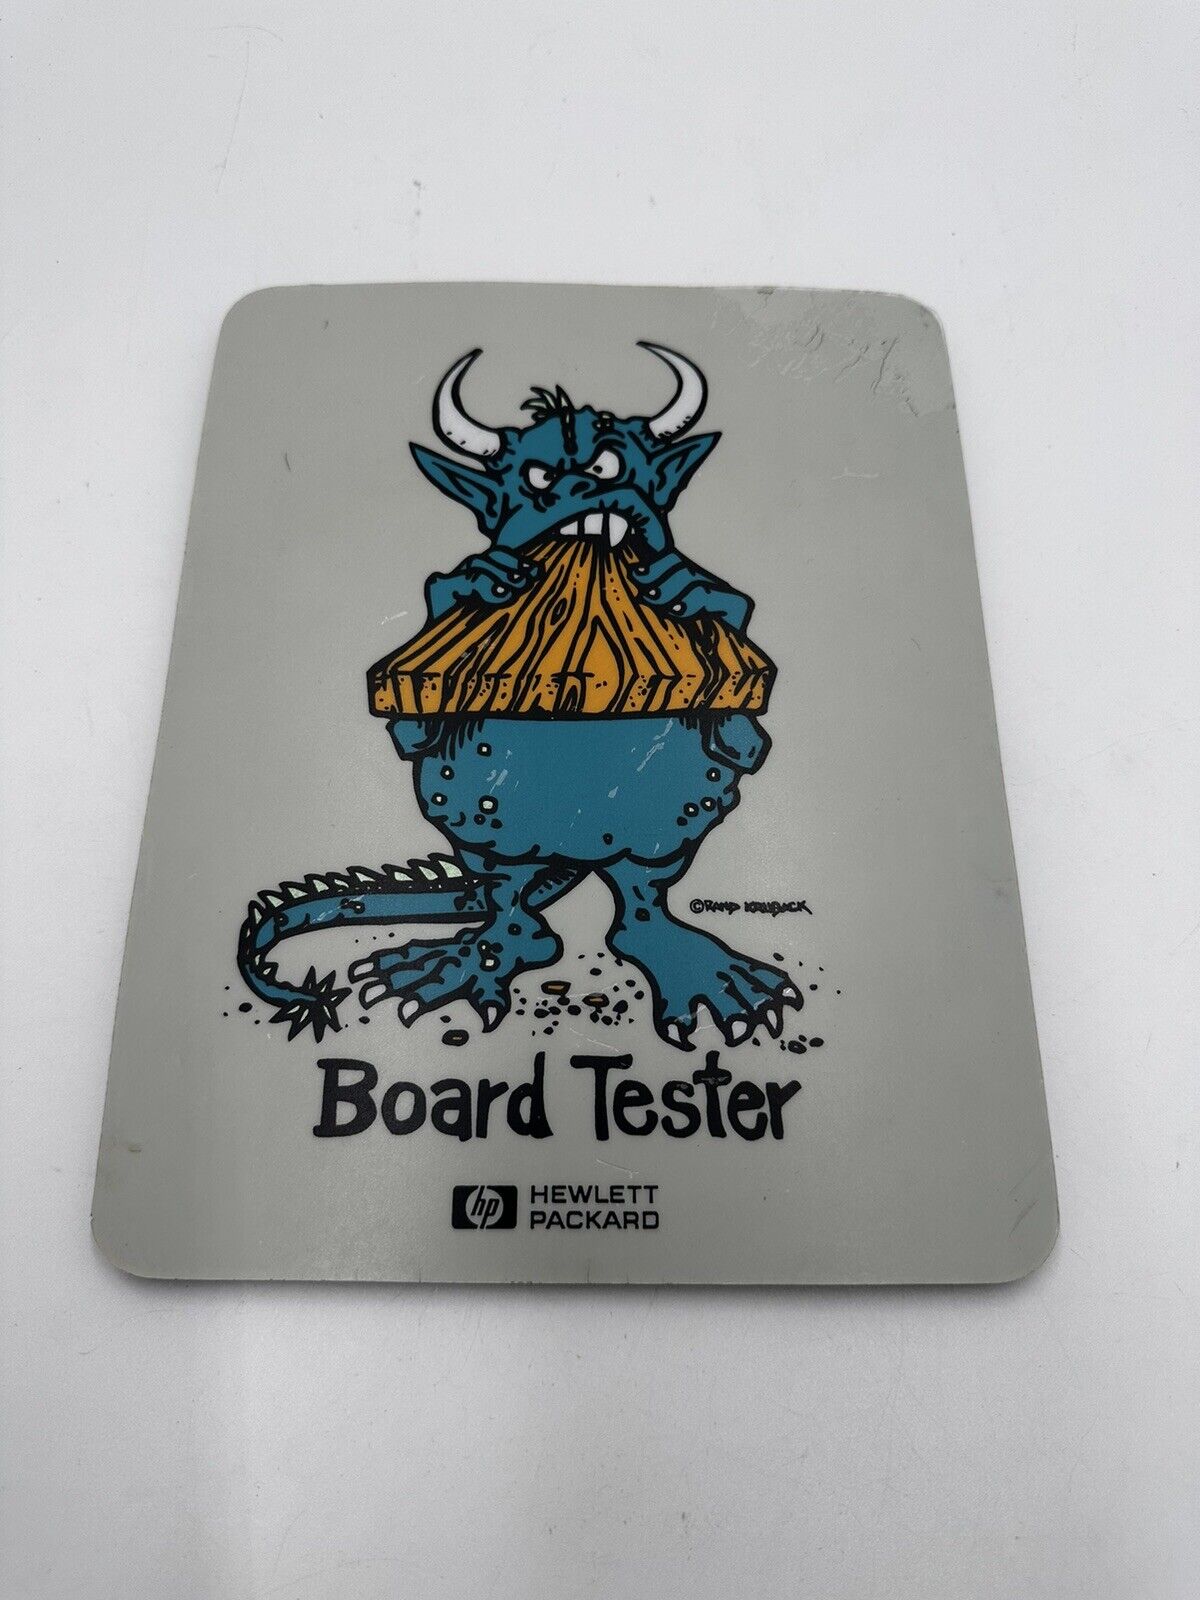 Hewlett-Packard Graphic Mouse Pad “board Tester”